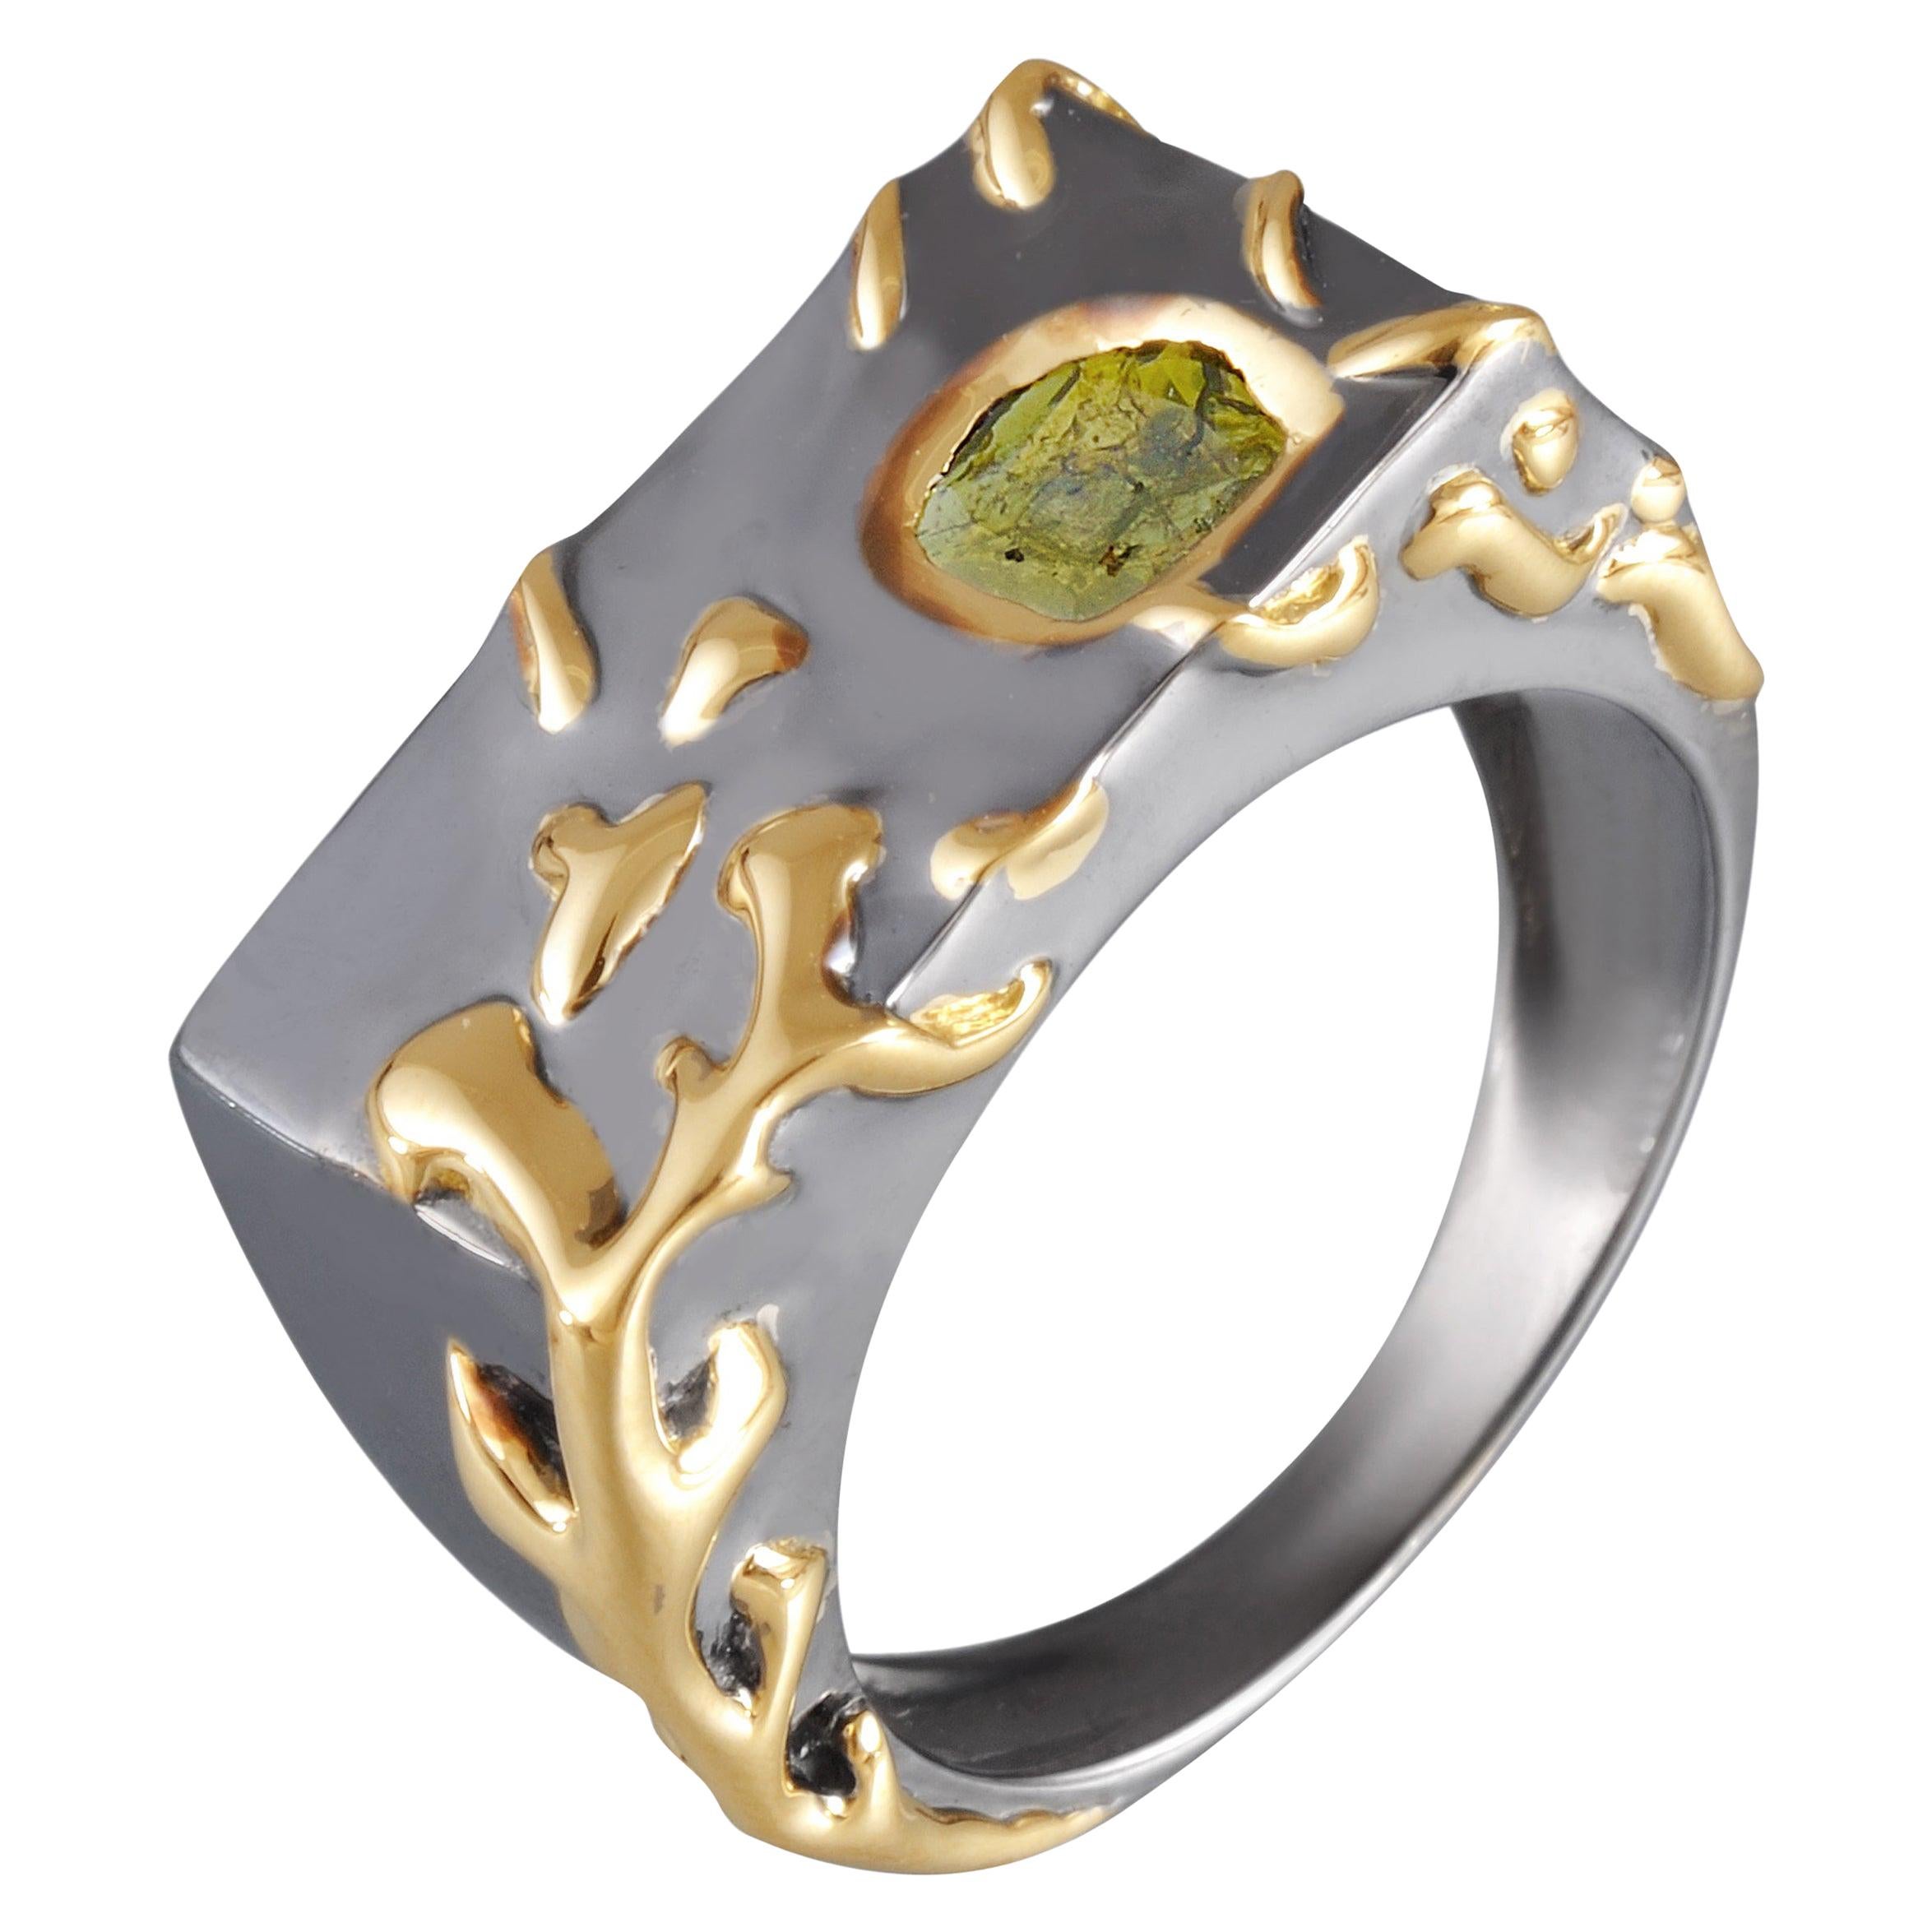 Envious Eyes will Roll with Contemporary One of a Kind Colored Diamond Gold Ring